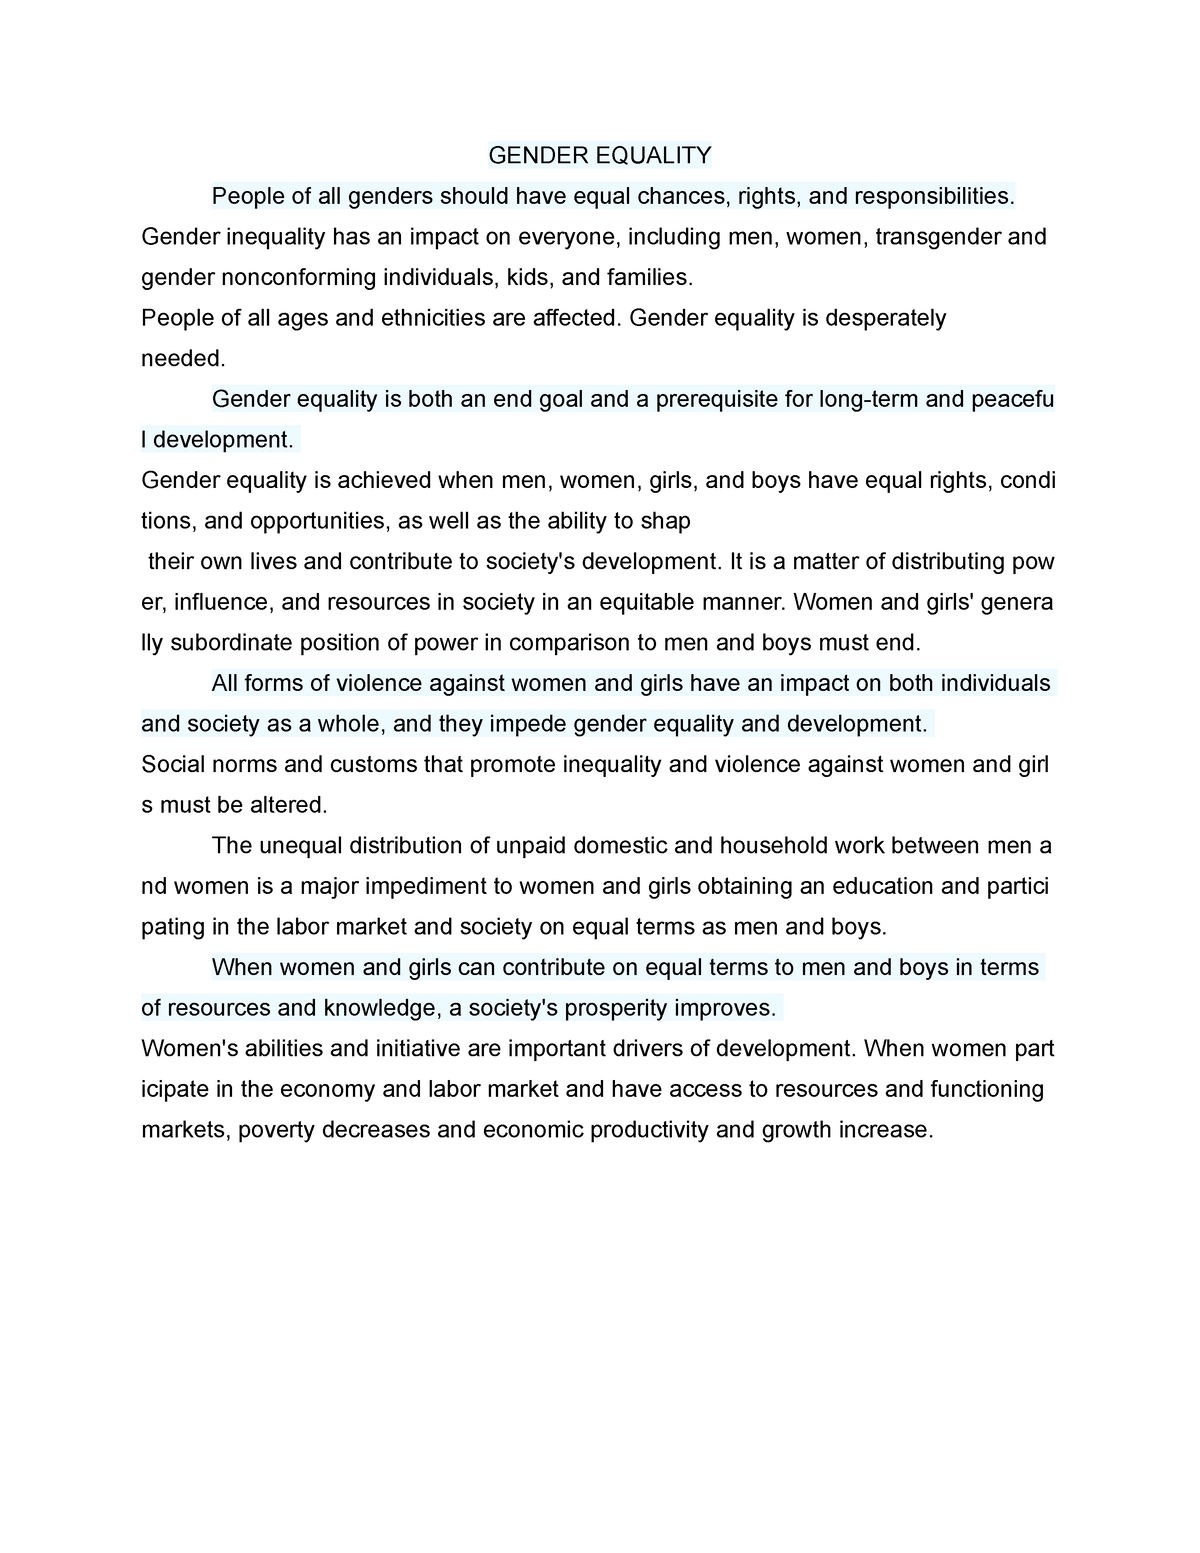 essay on gender equality in society